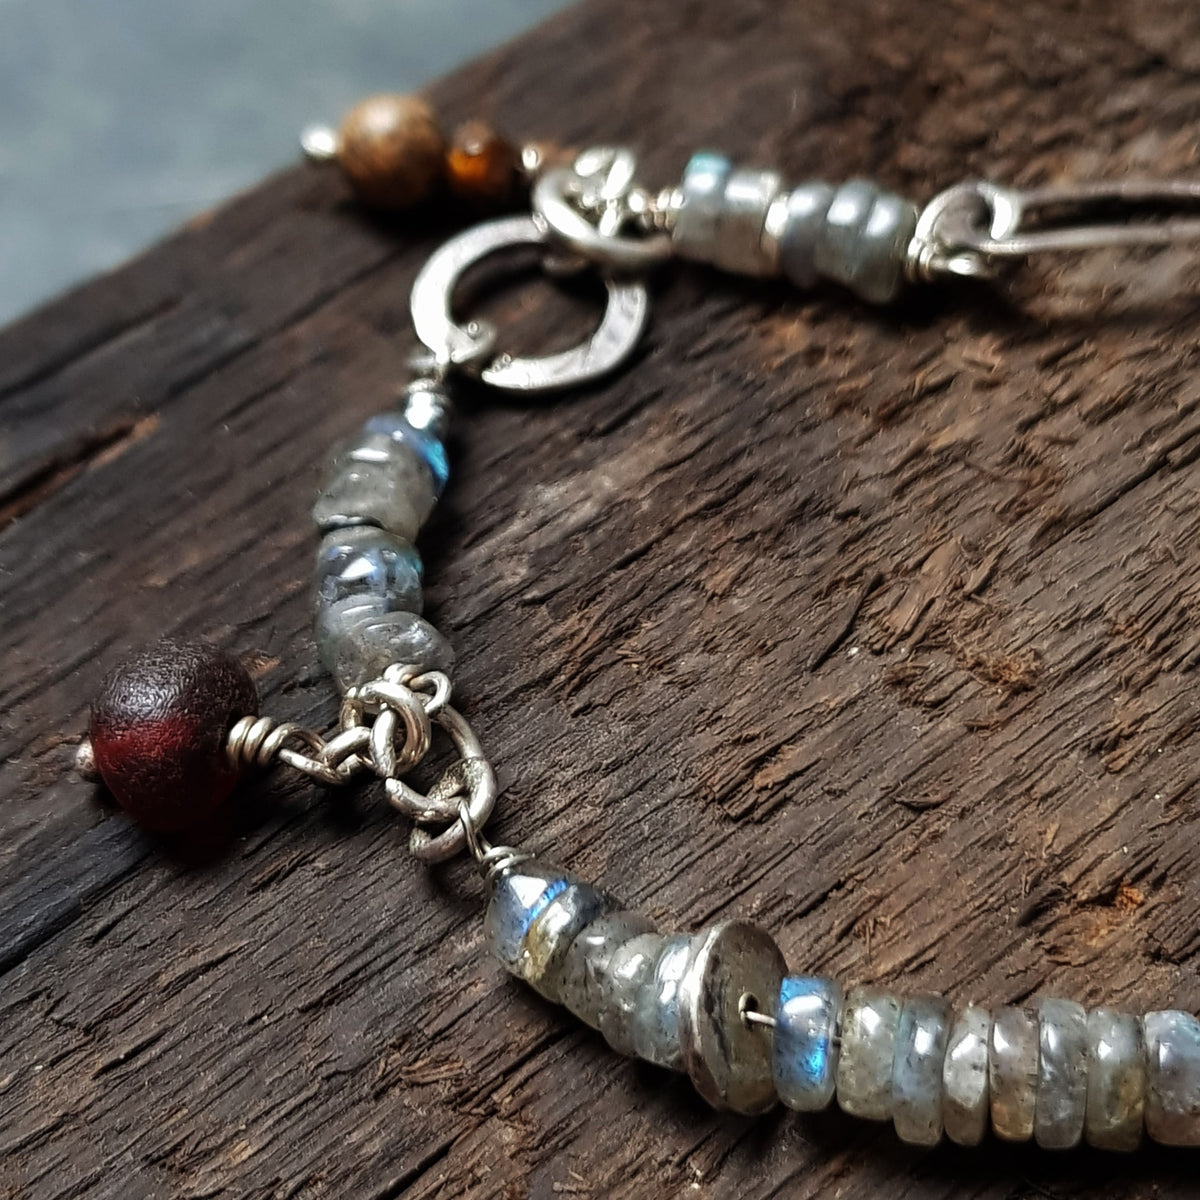 Blue labradorite bracelet with hammered silver links and gemstone charms, rustic style handmade roff